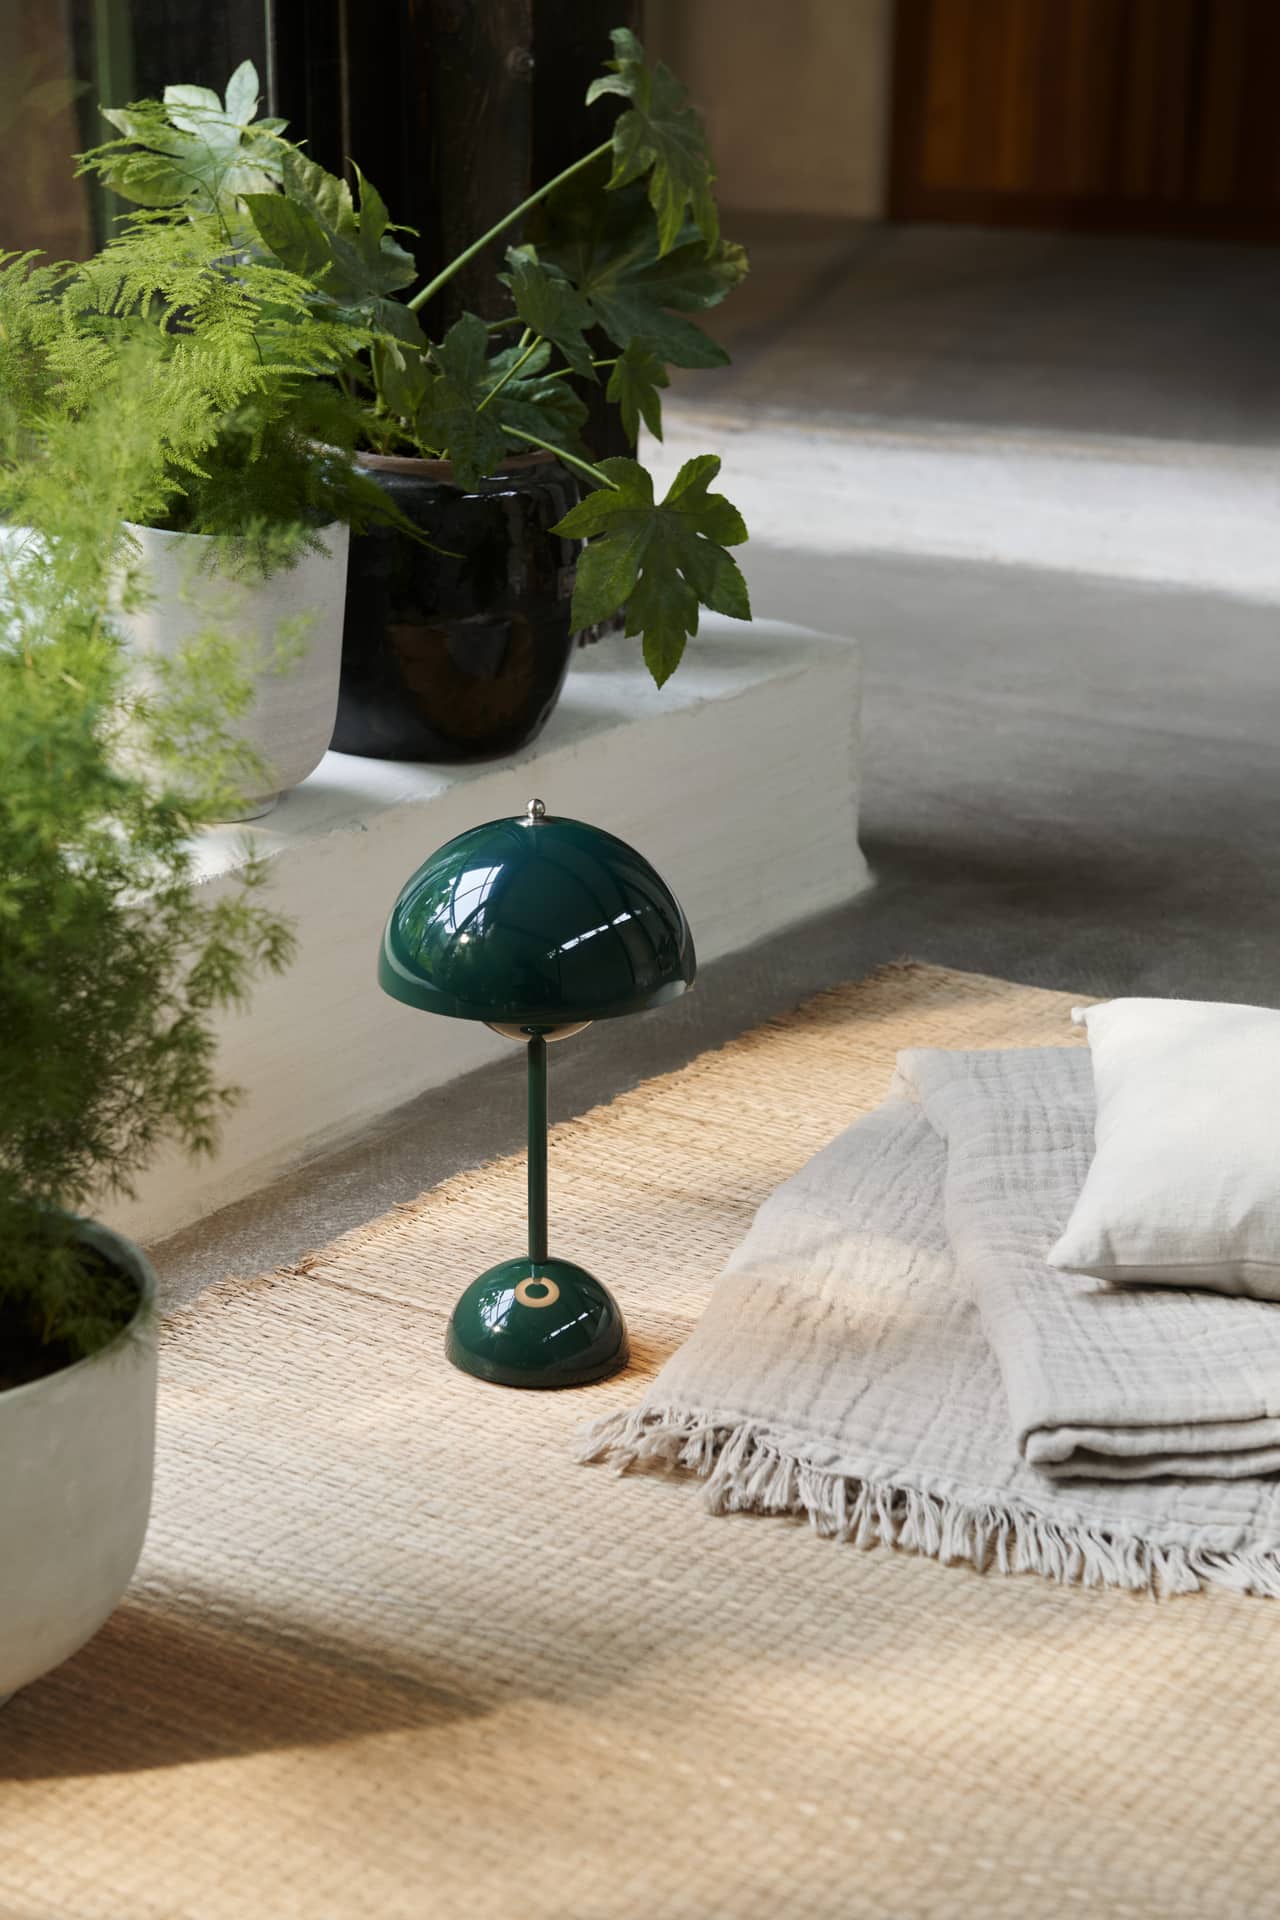 Flowerpot VP9 Portable Table Lamp by Table Lamps